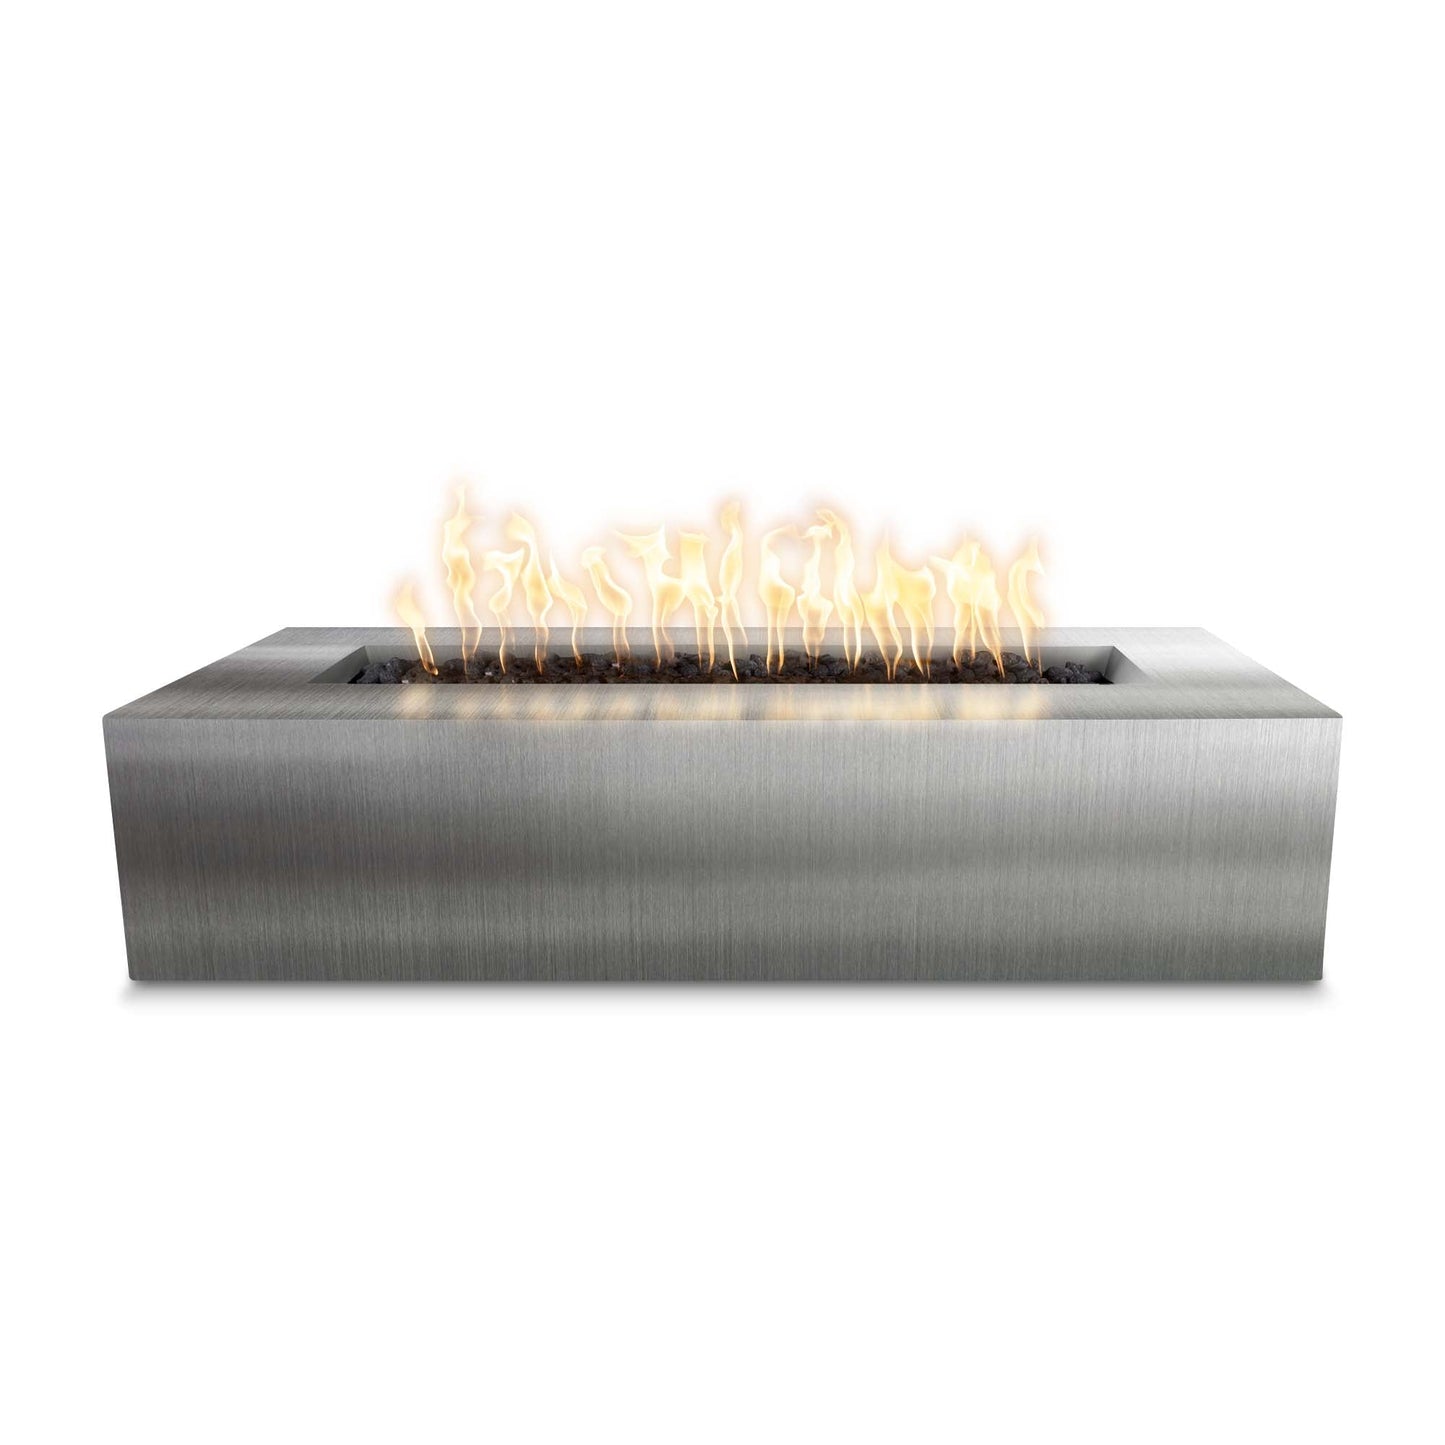 The Outdoor Plus Rectangular Regal 60" Hammered Copper Liquid Propane Fire Pit with 110V Electronic Ignition